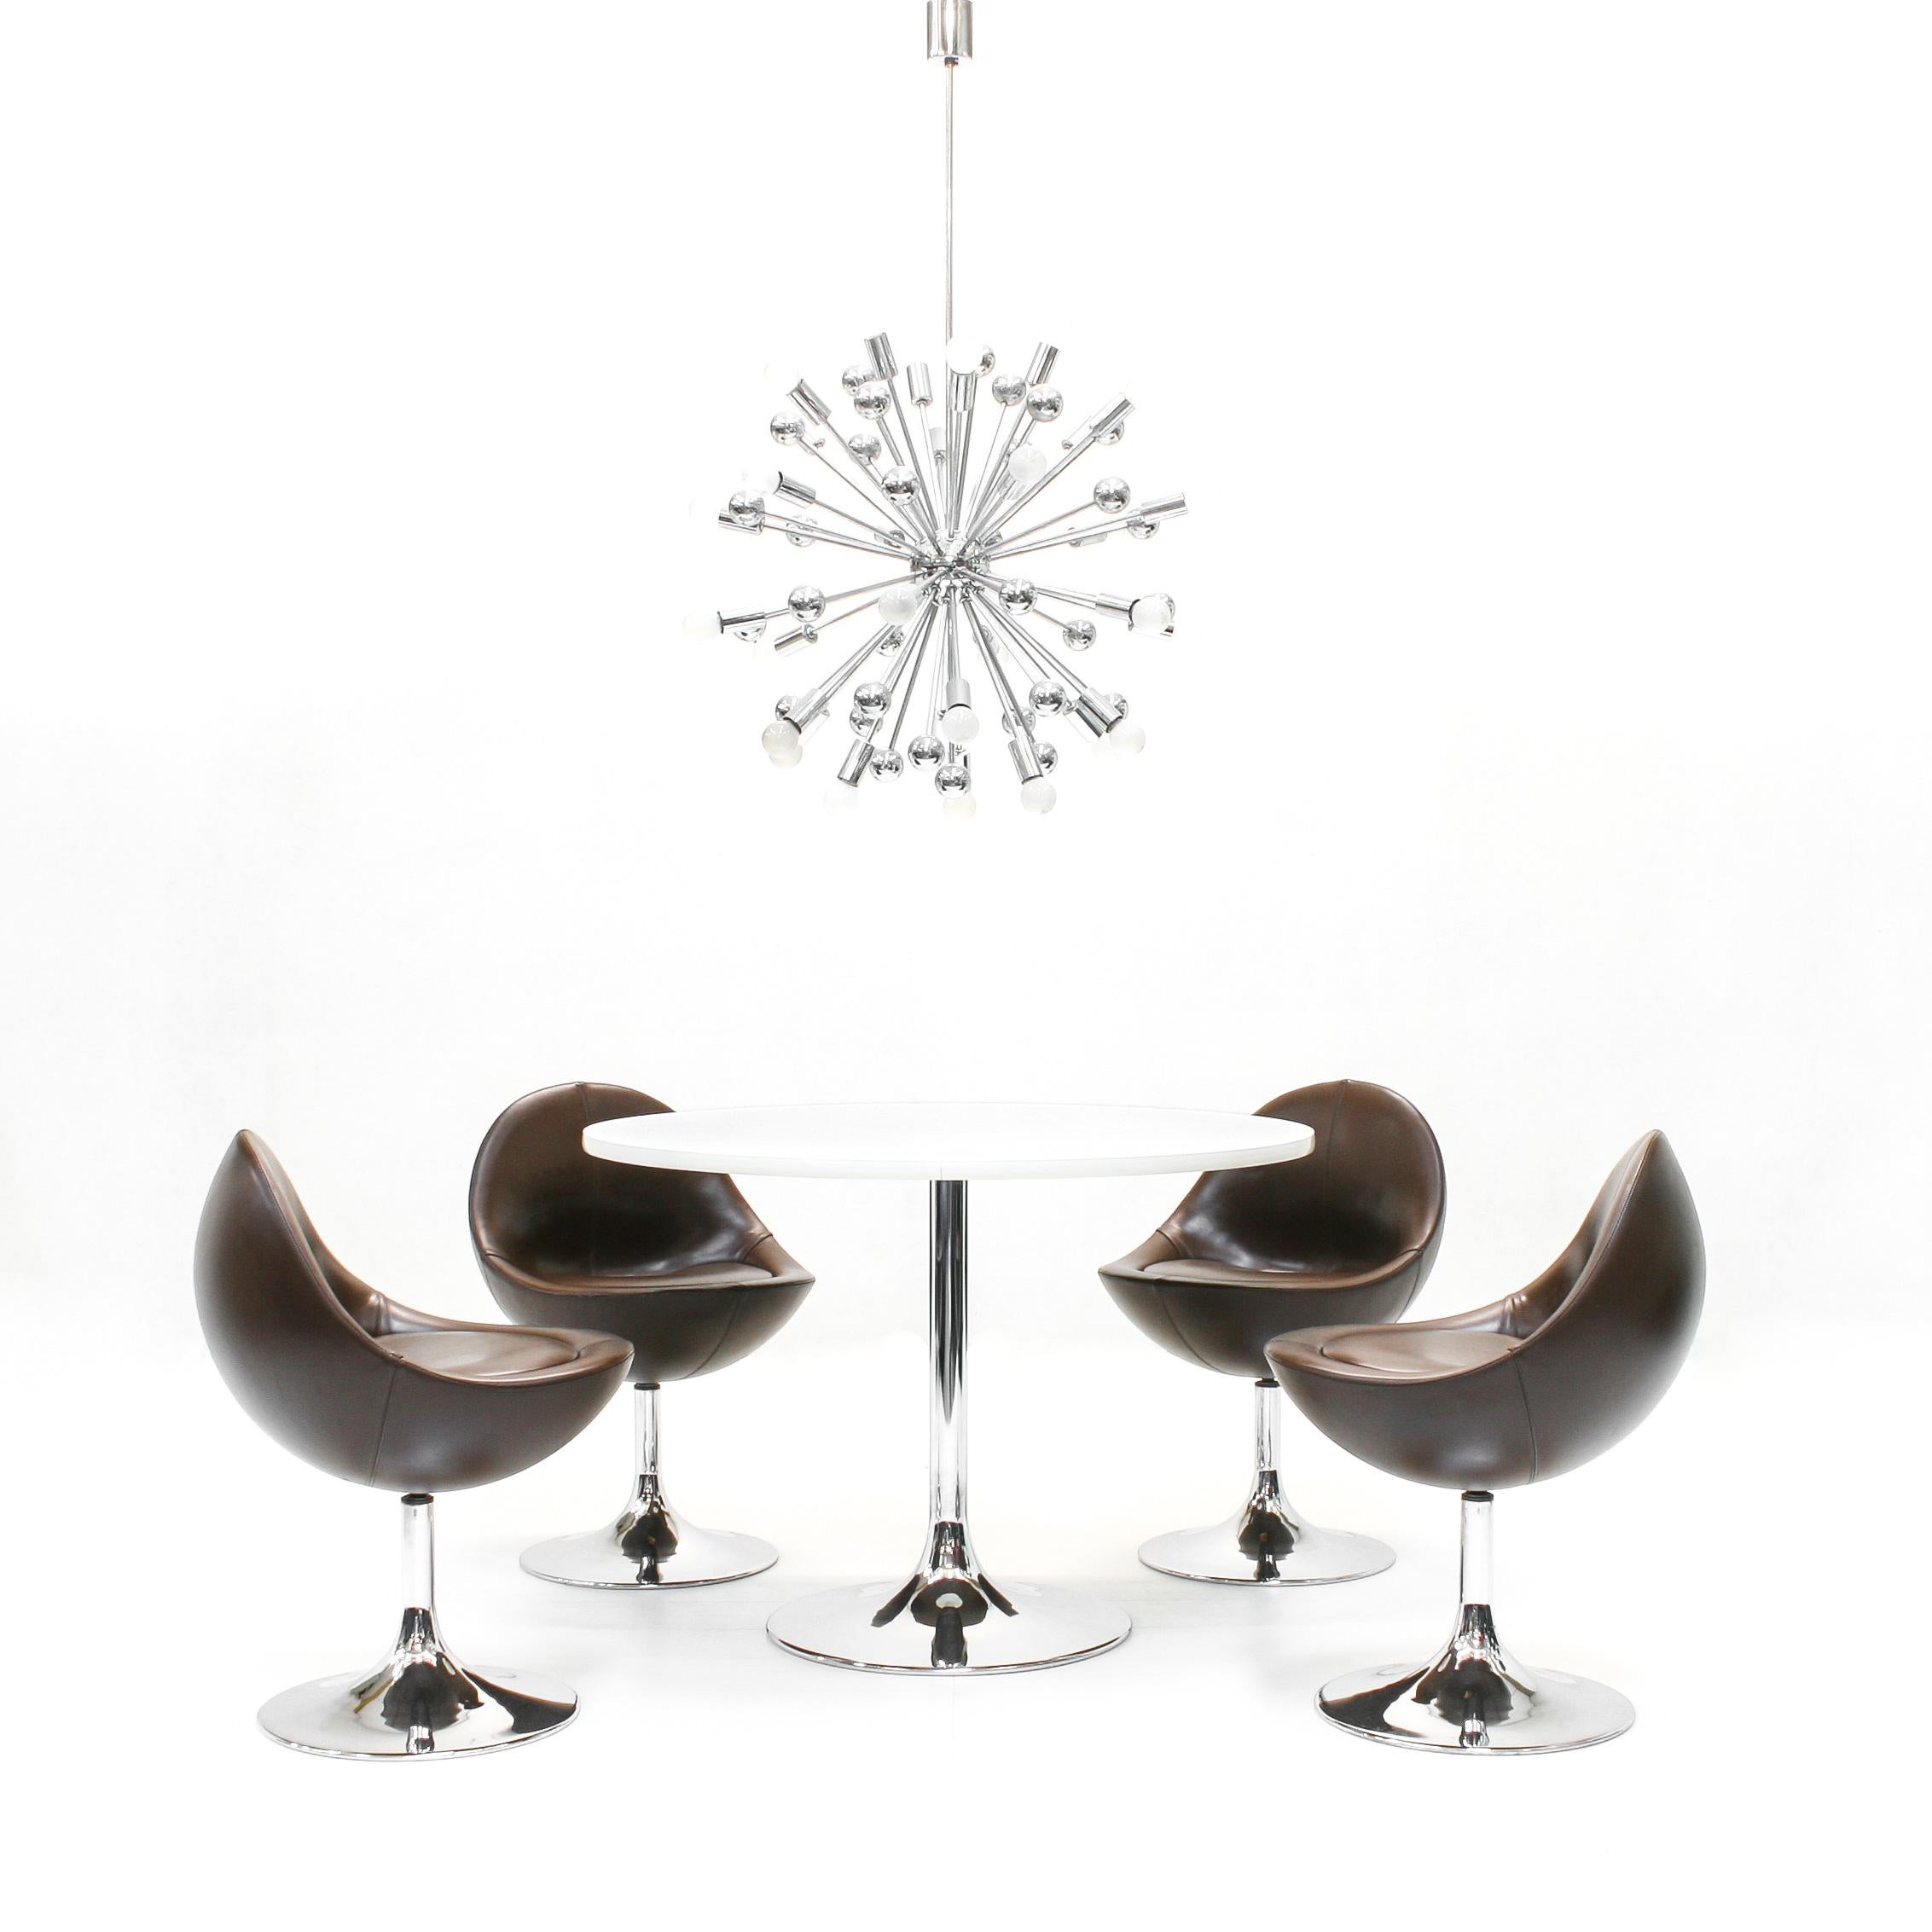 The Venus range with chrome trumpet base was designed in the late sixties by Börje Johanson. This set features four ?52 x 73 cm swivel chairs and a table which is ?100 x H70 cm.